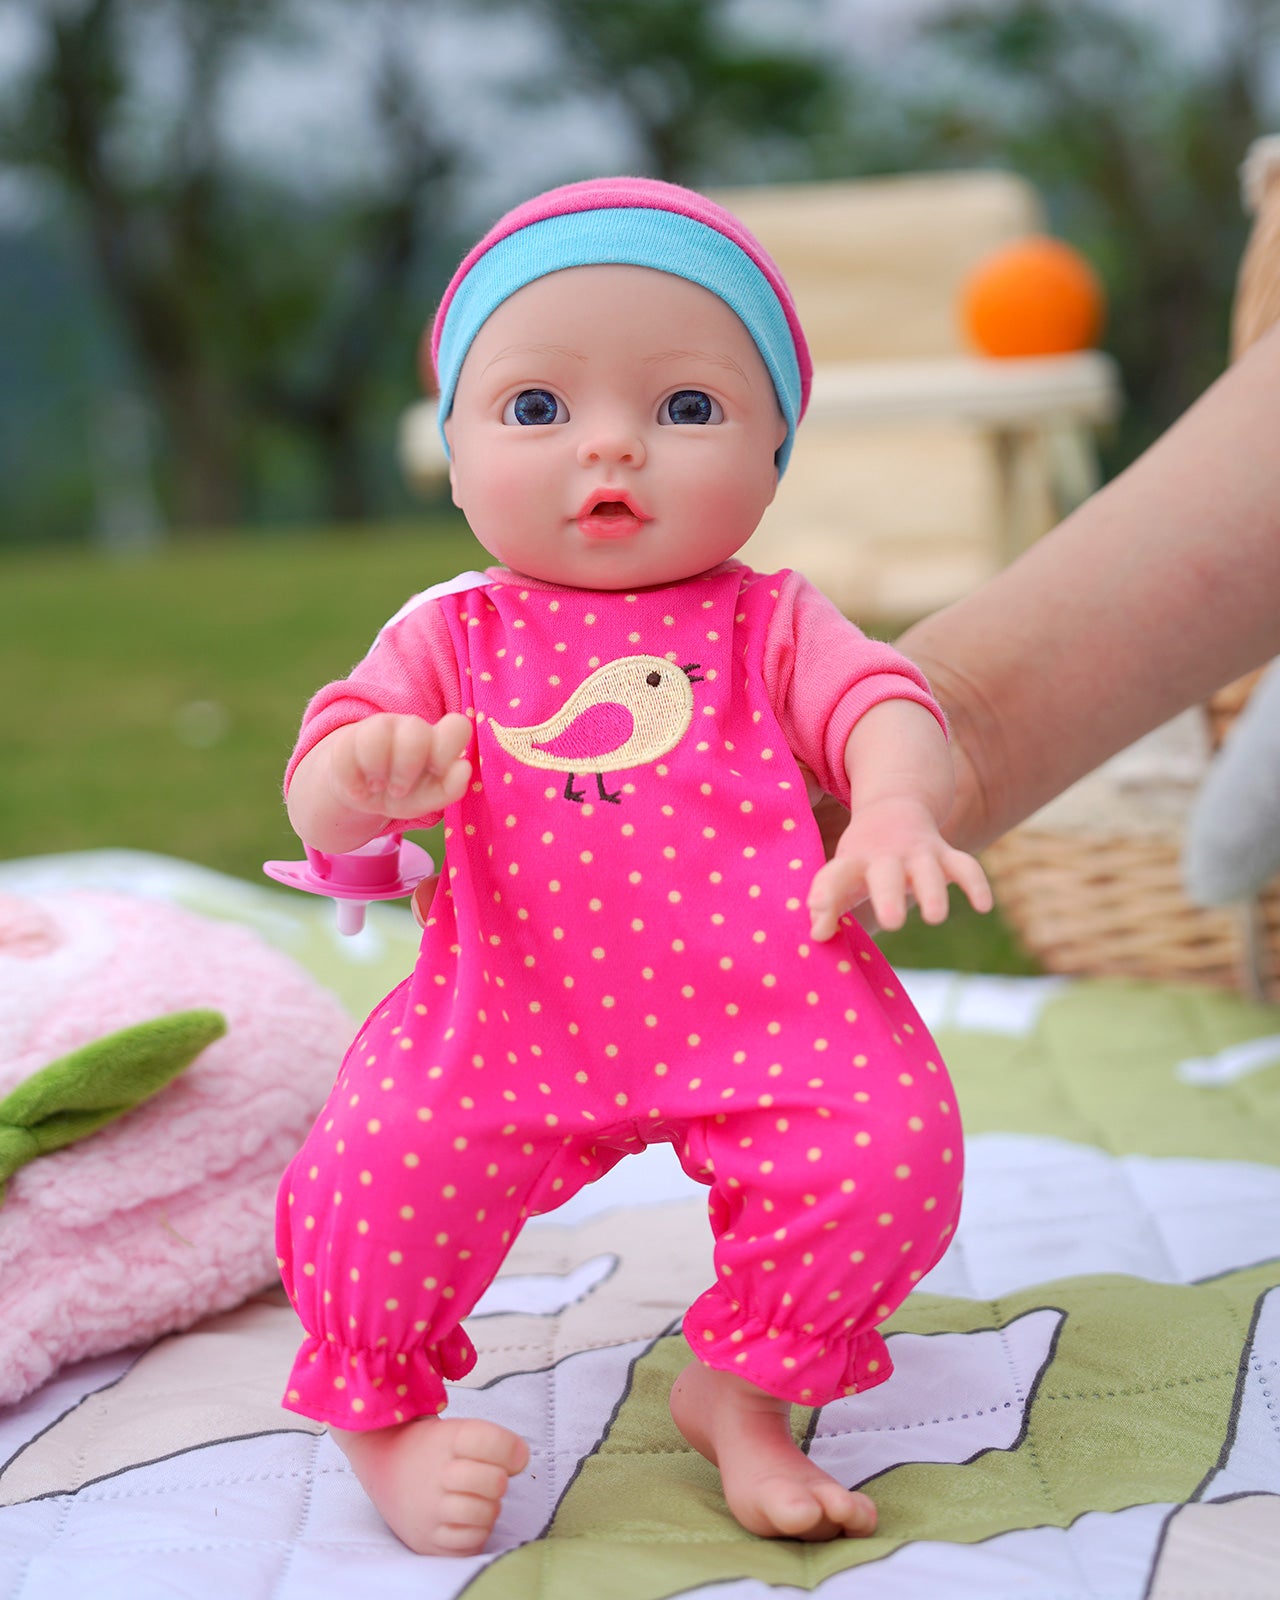 Rose - 13" Full Silicone Reborn Baby Dolls Real Baby Feeling Newborn Girl Wth With Flexible Limbs Can Pose What You Want